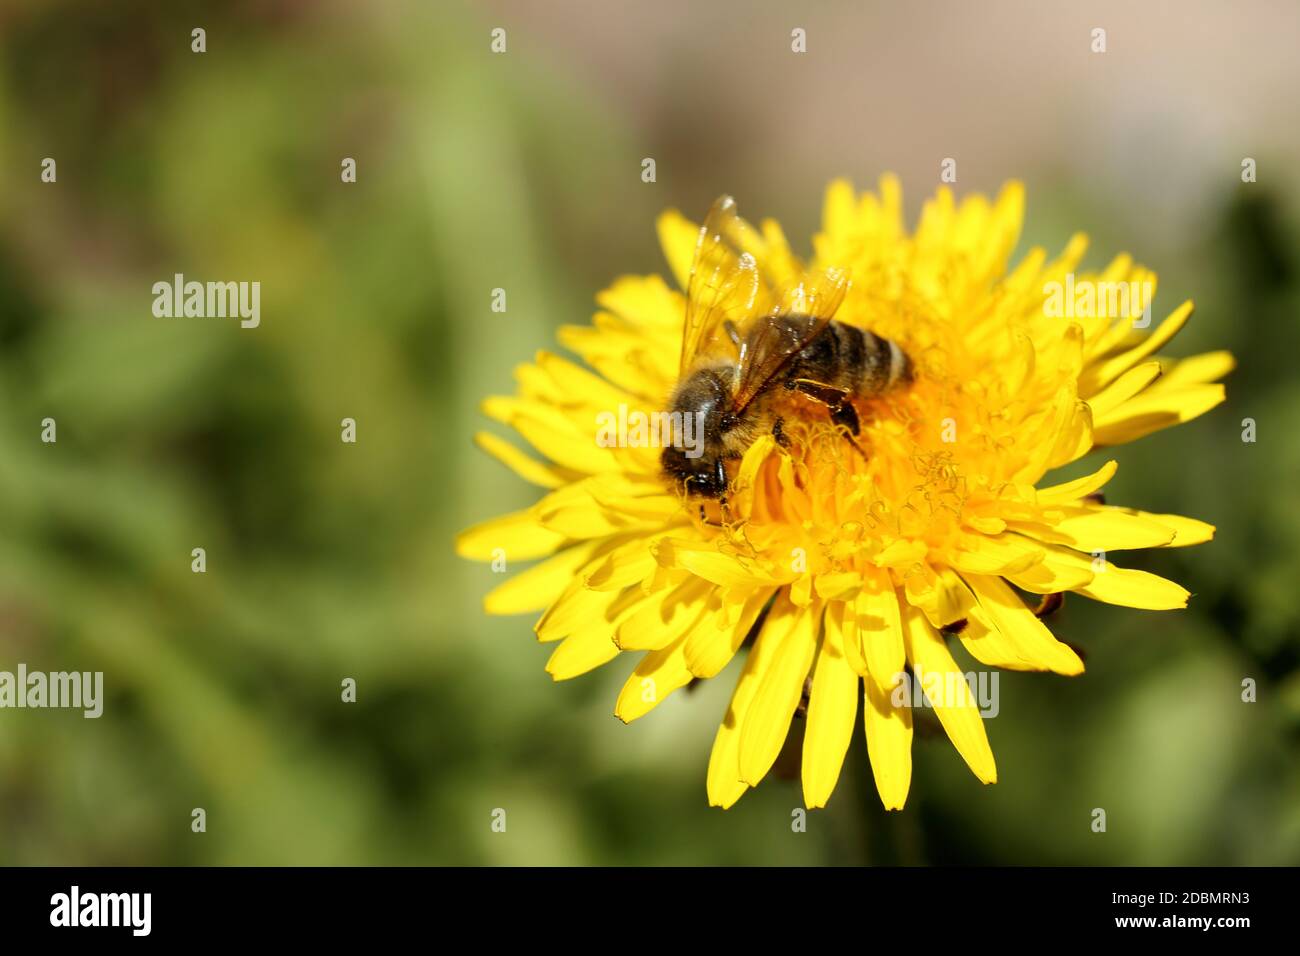 one honey bee is sitting on a dandelion flower Stock Photo